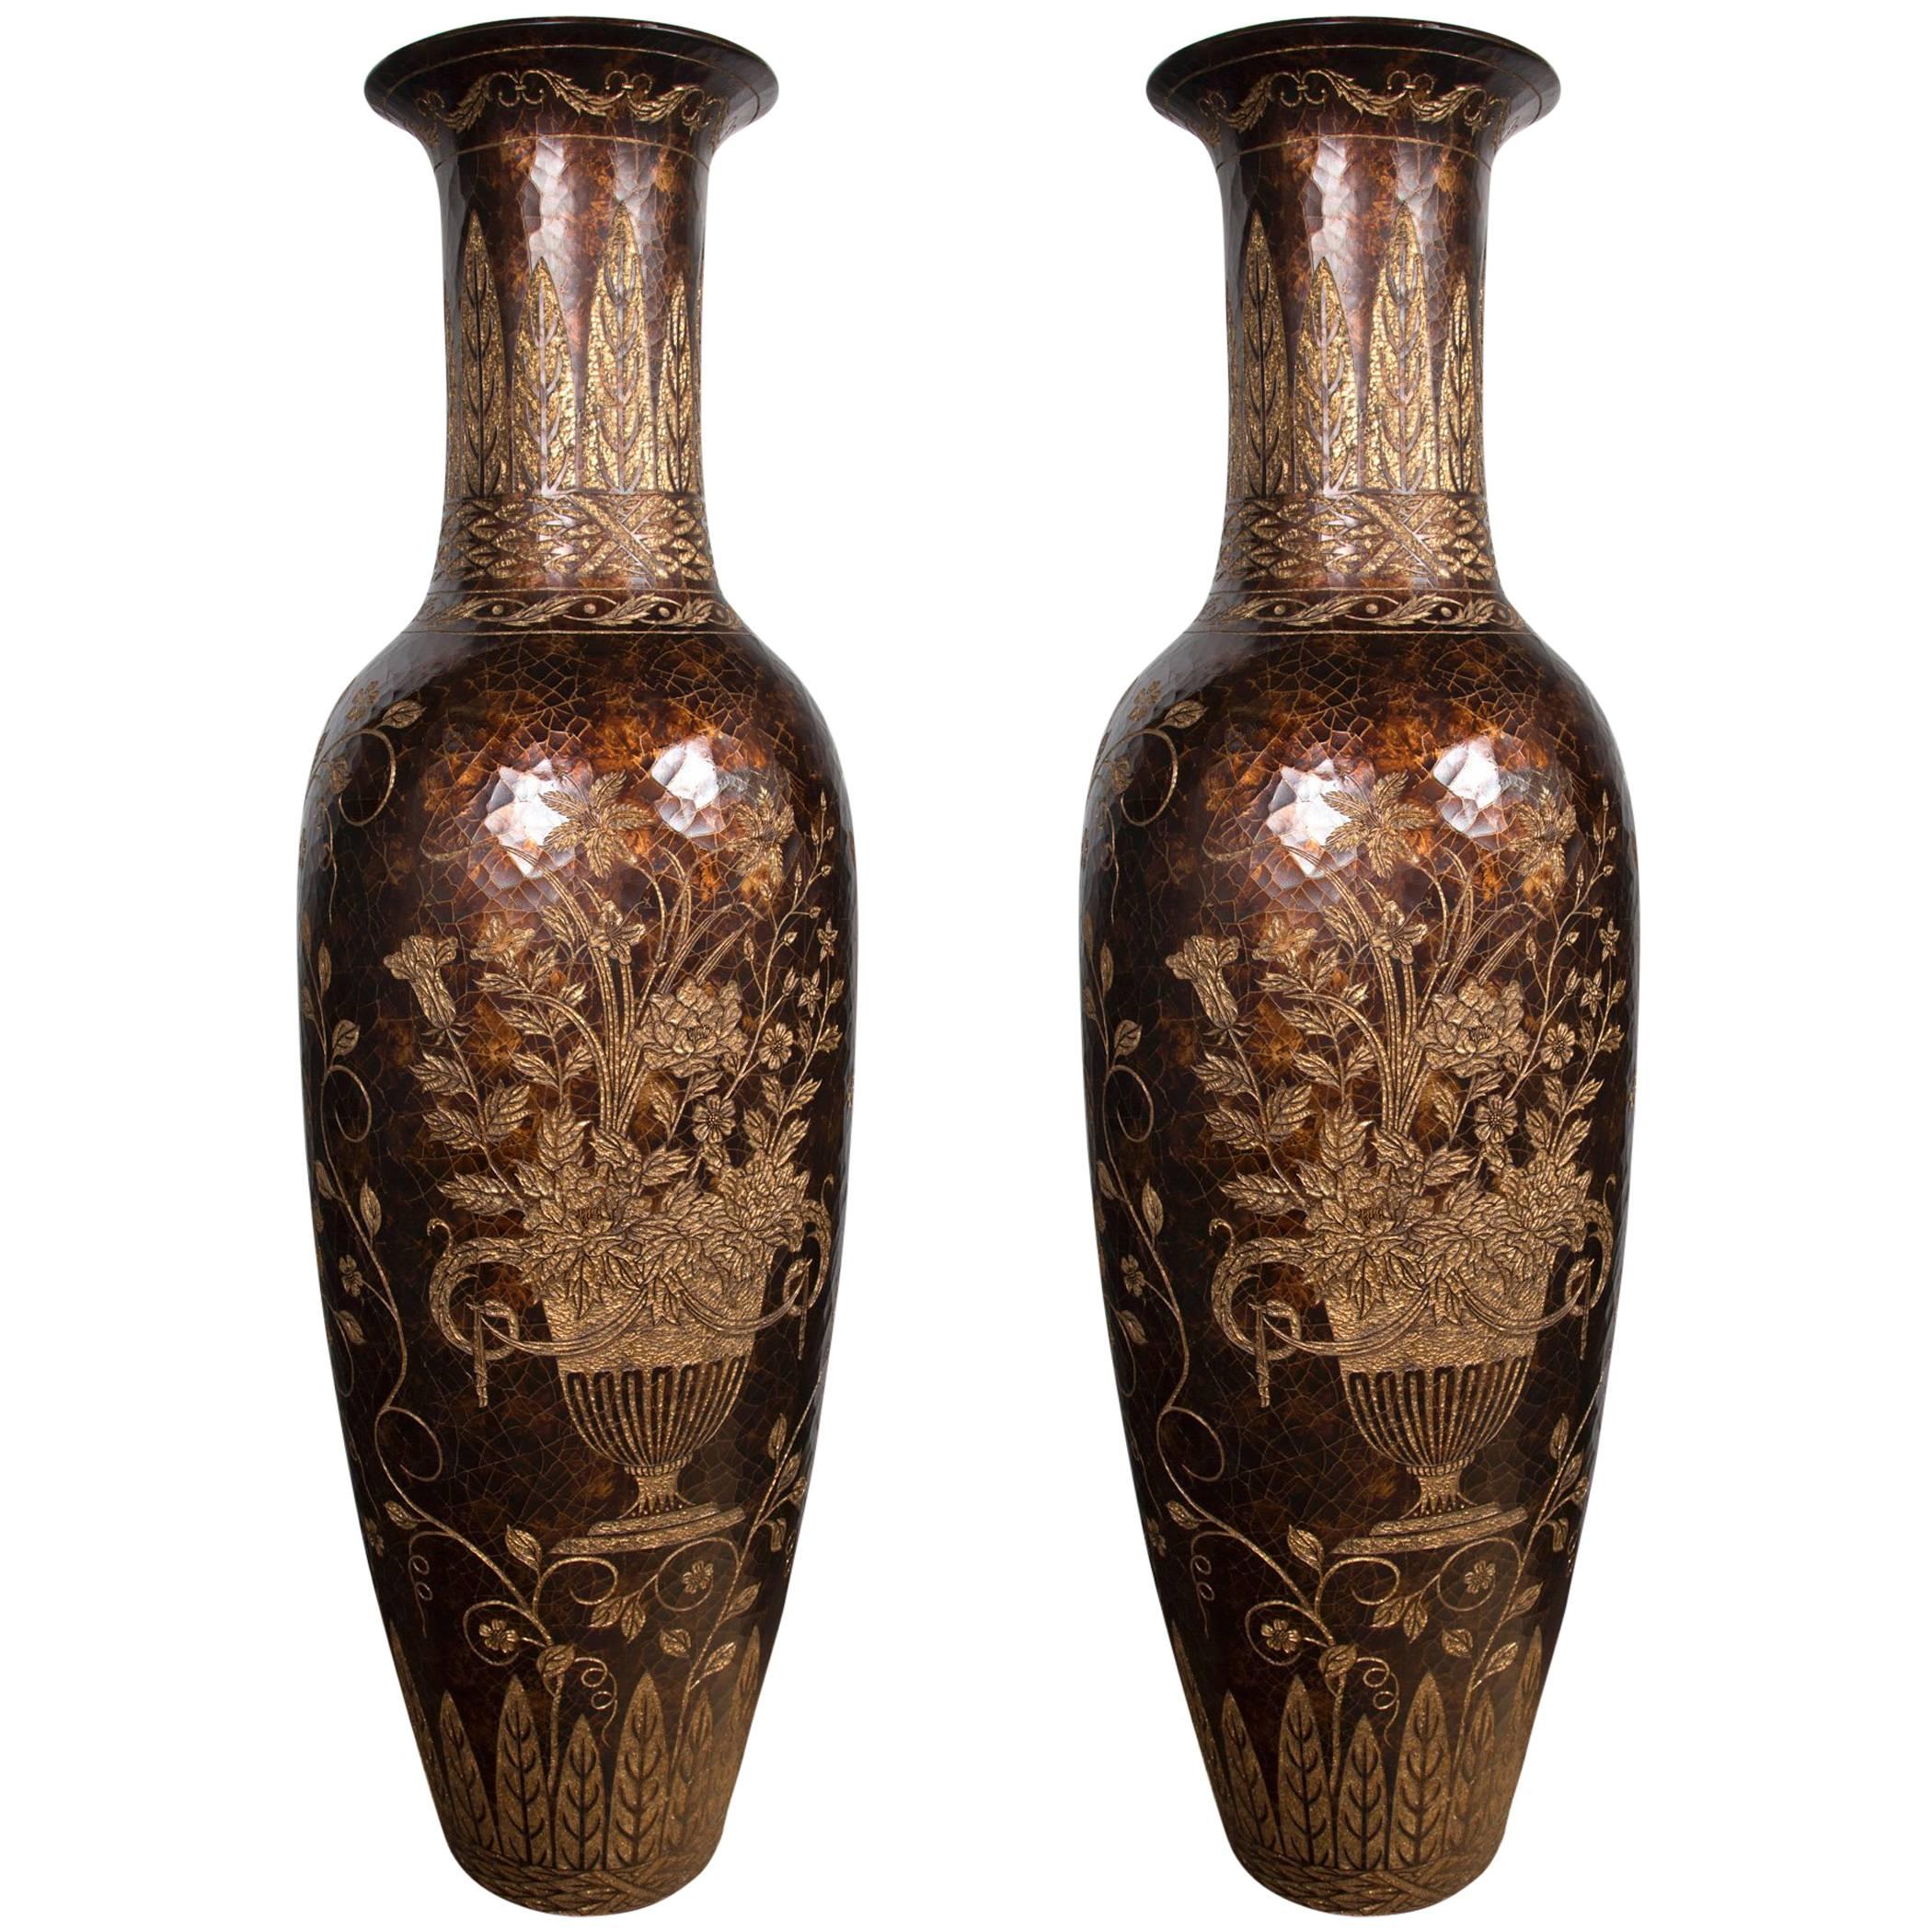 Unusual Pair of Tall Lacquered and Incised Chinese Floor Vases